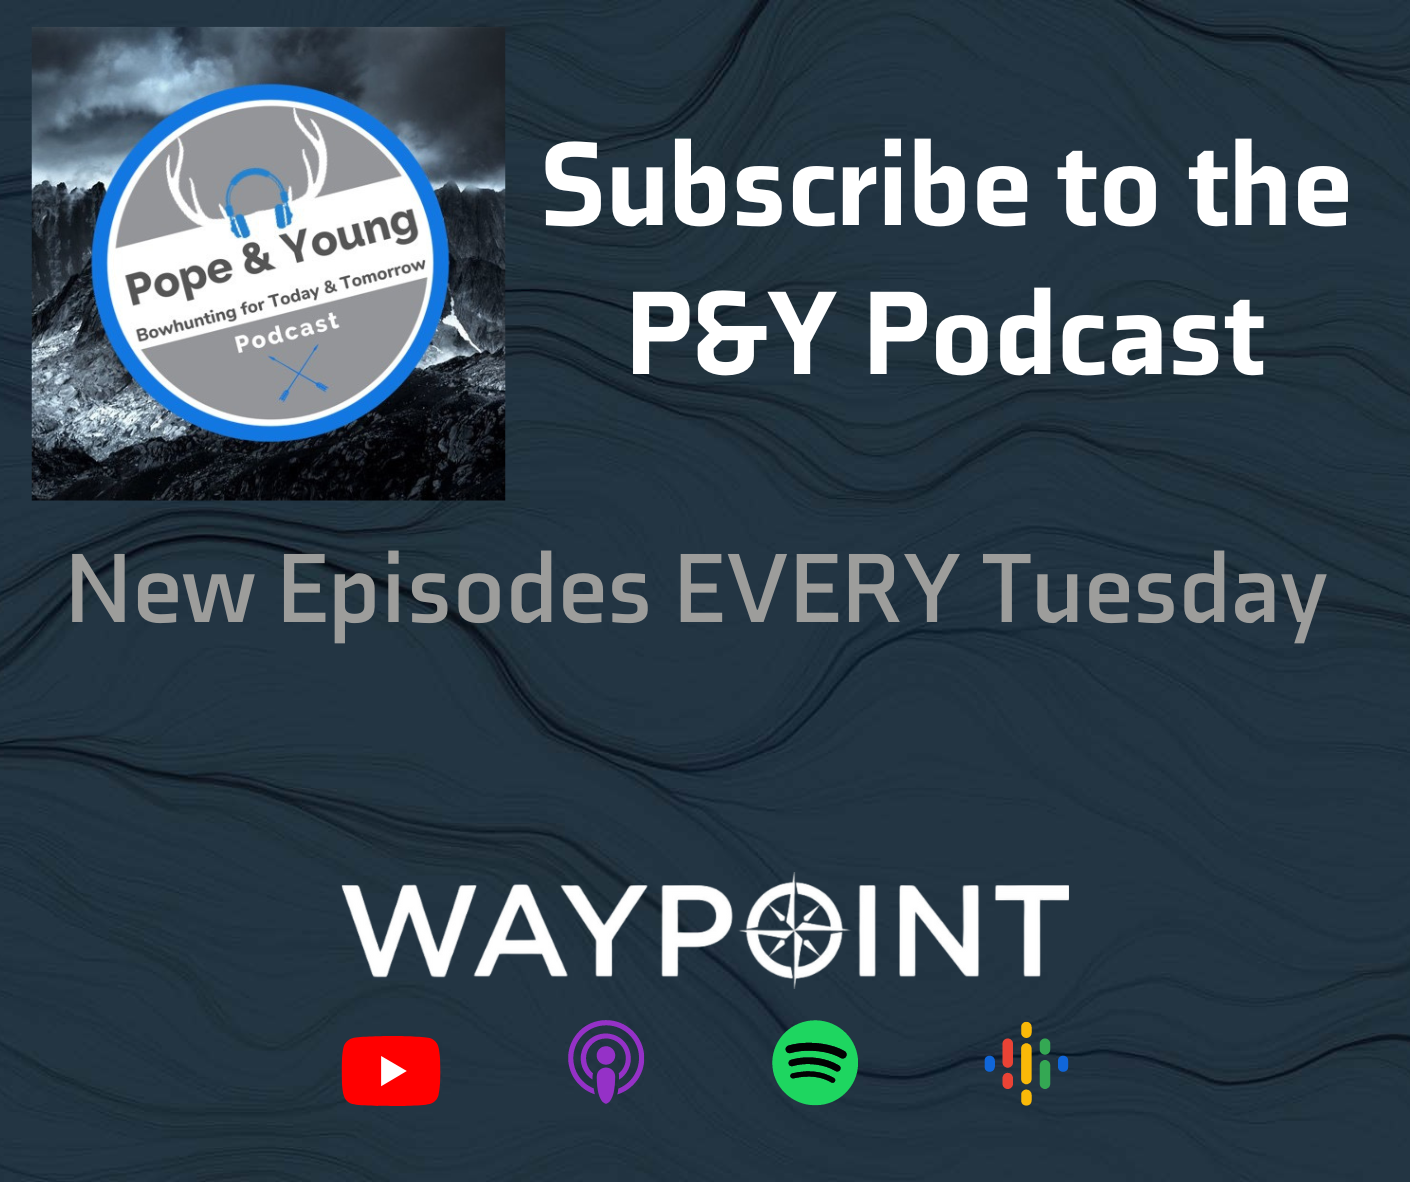 
Pope & Young Podcast is Full Steam Ahead